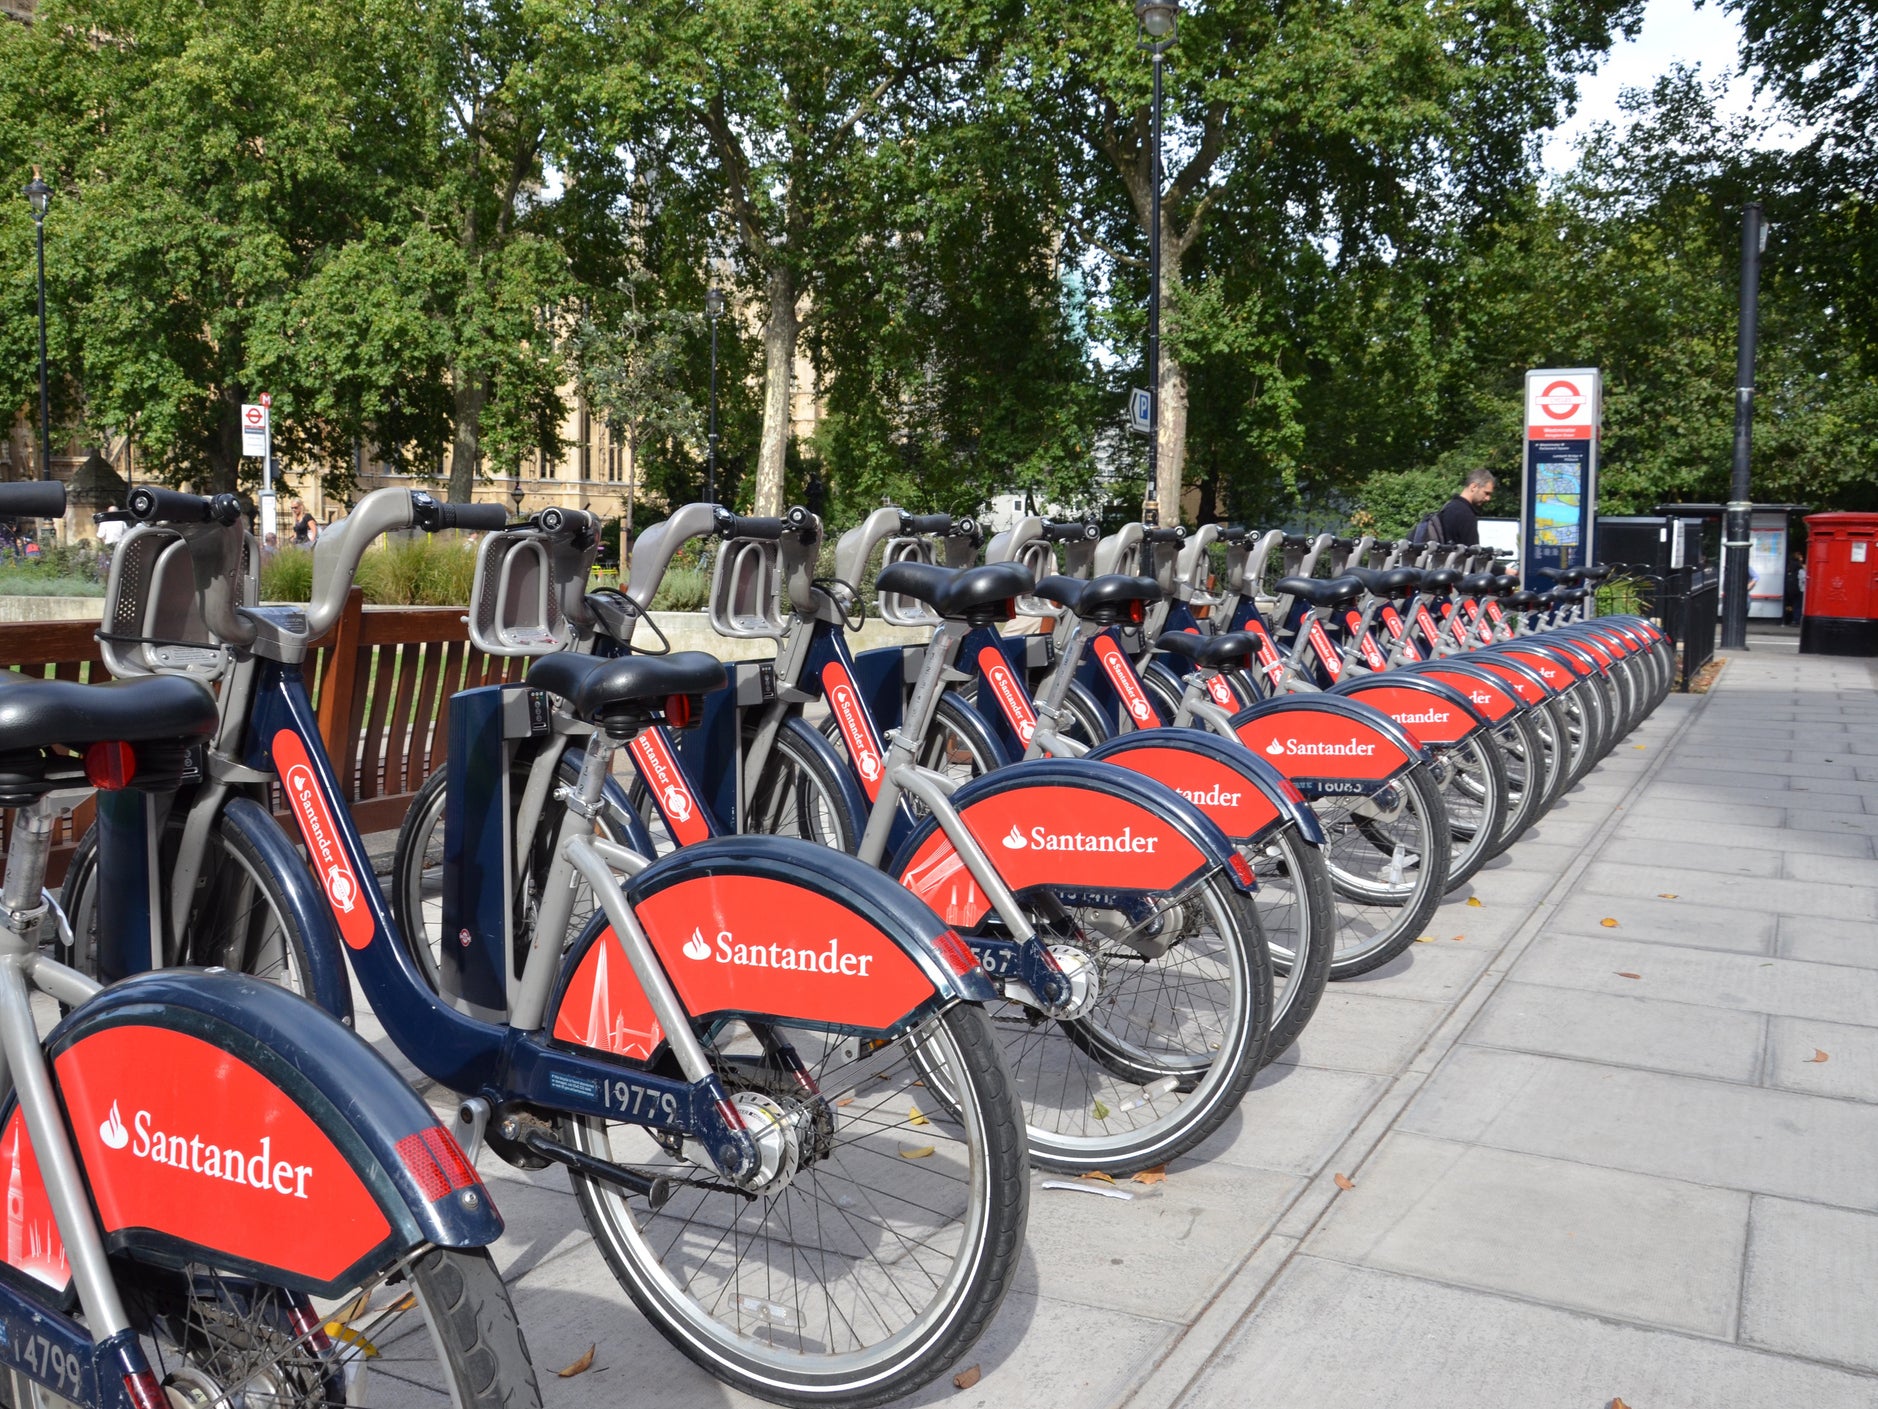 Google will provide real-time information showing how many bikes are available at docking stations